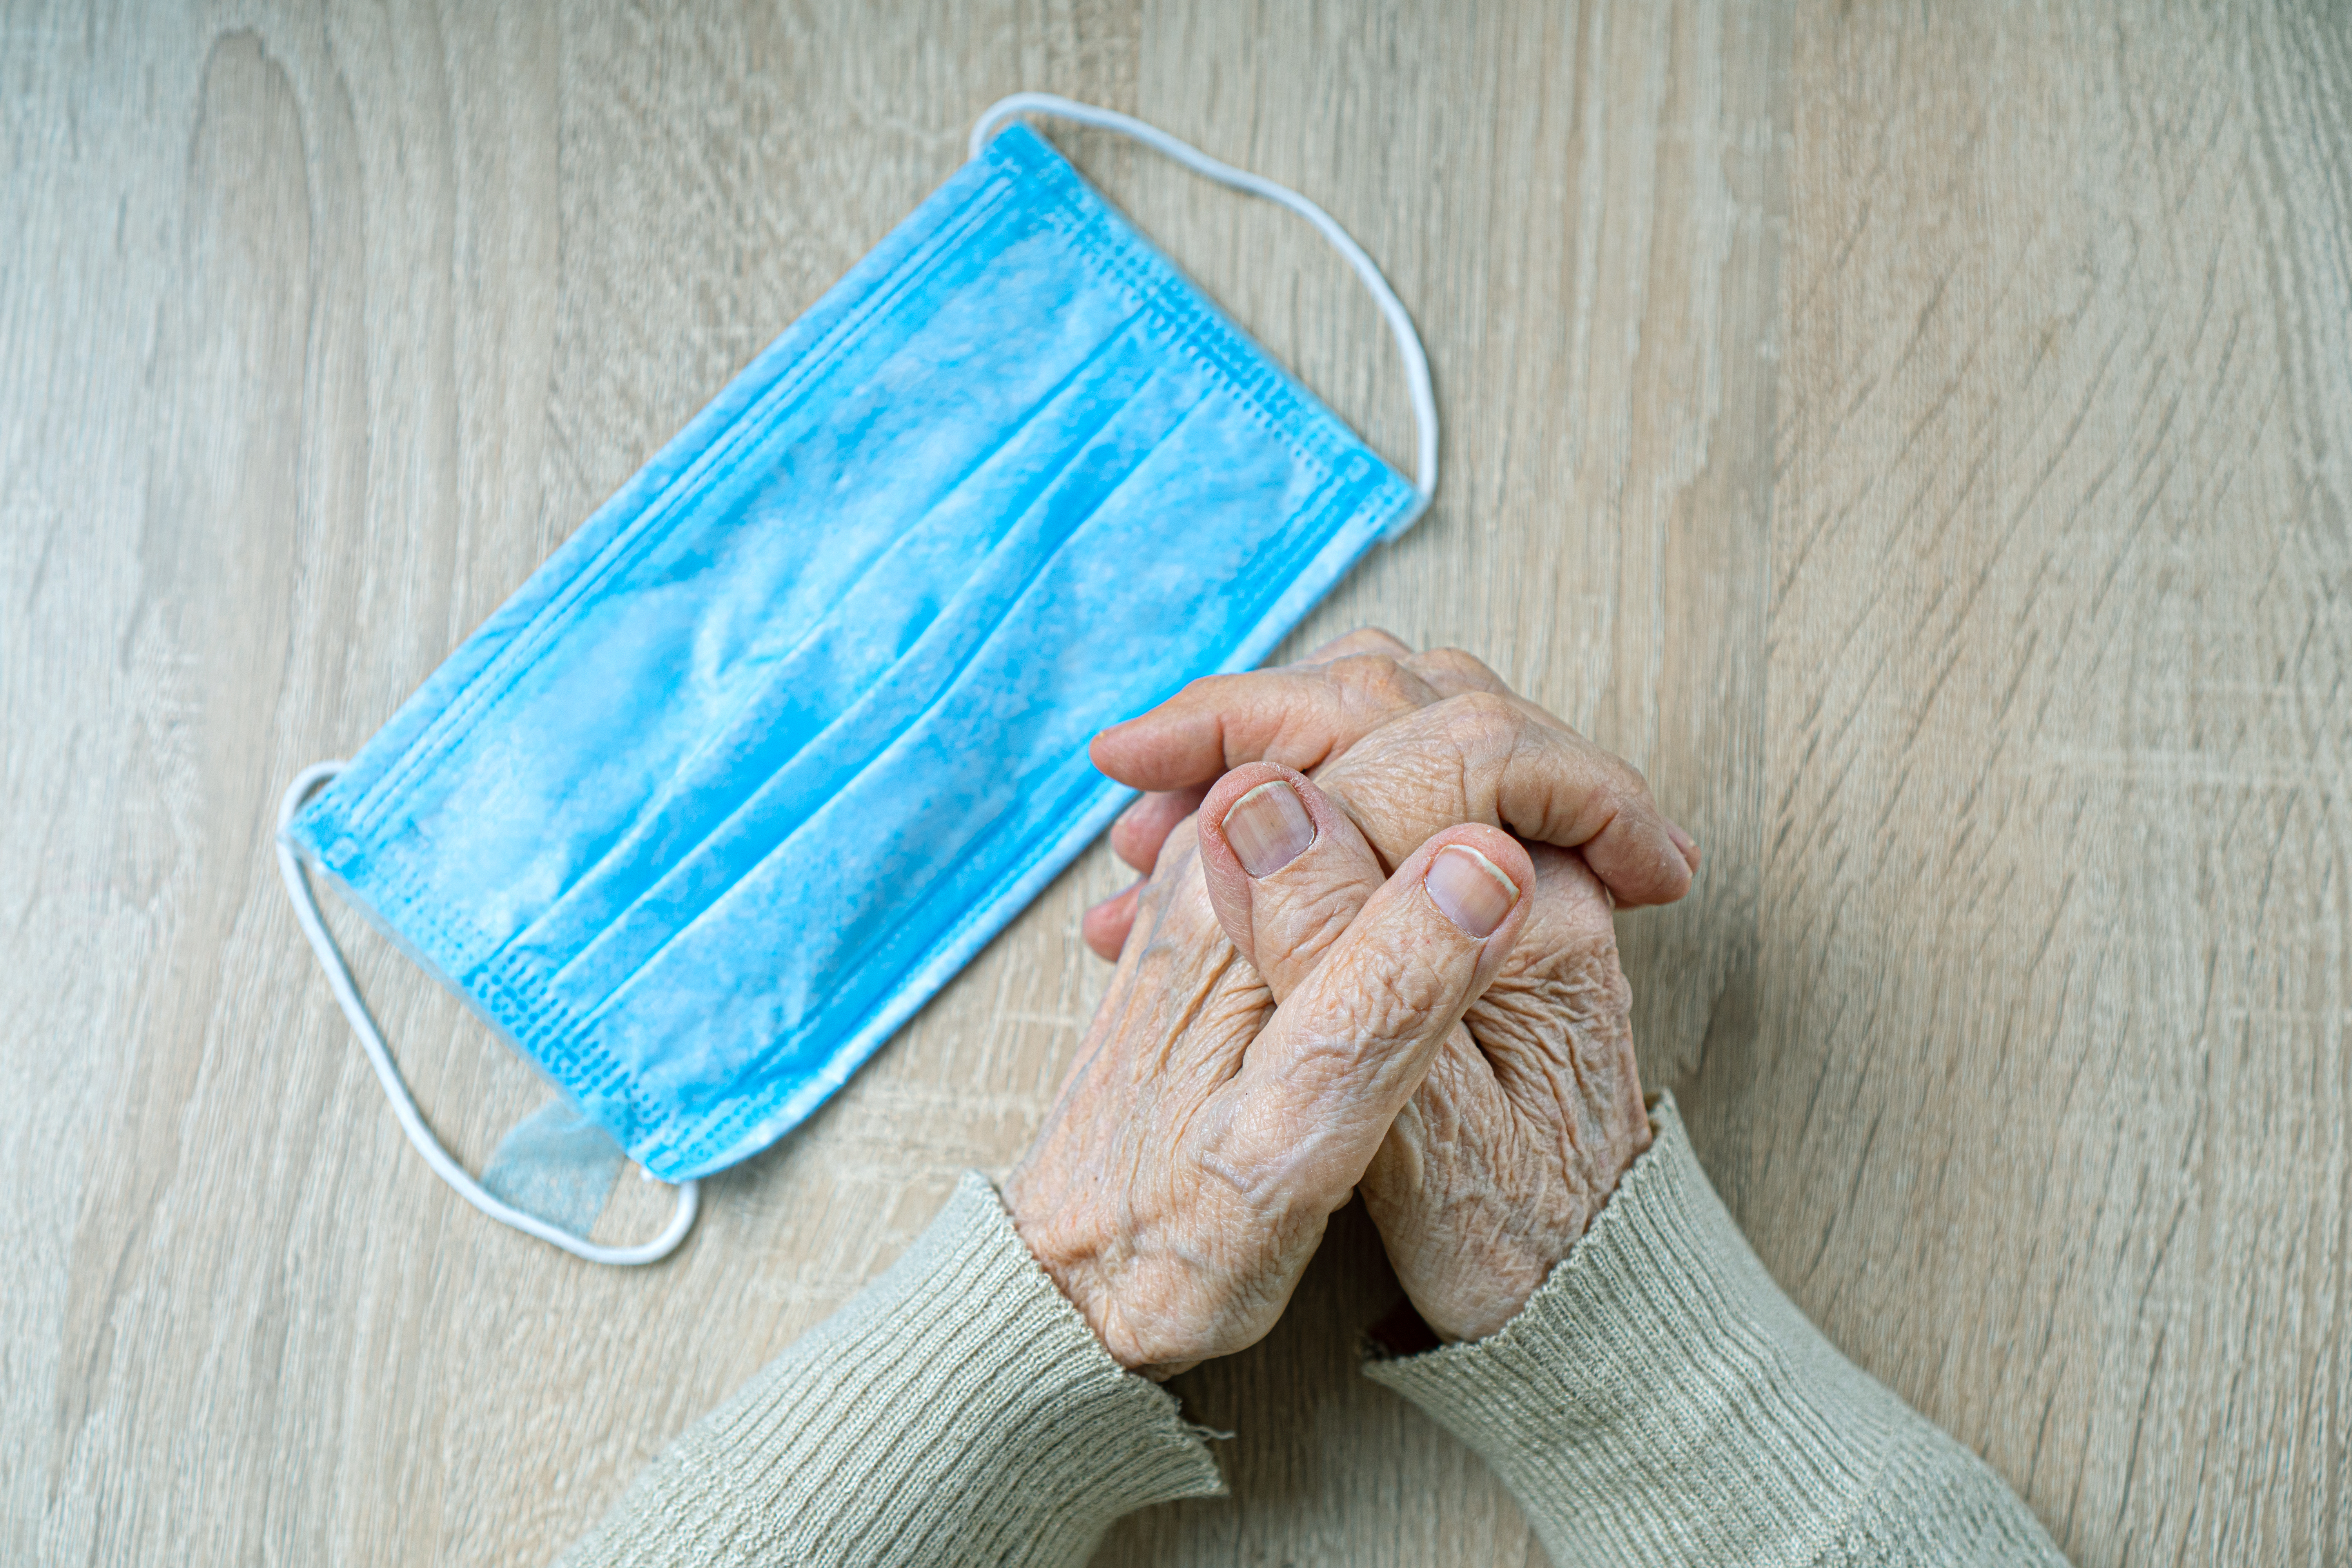 elderly hands resting on table with interlocked fingers. Surgical mask also on table.